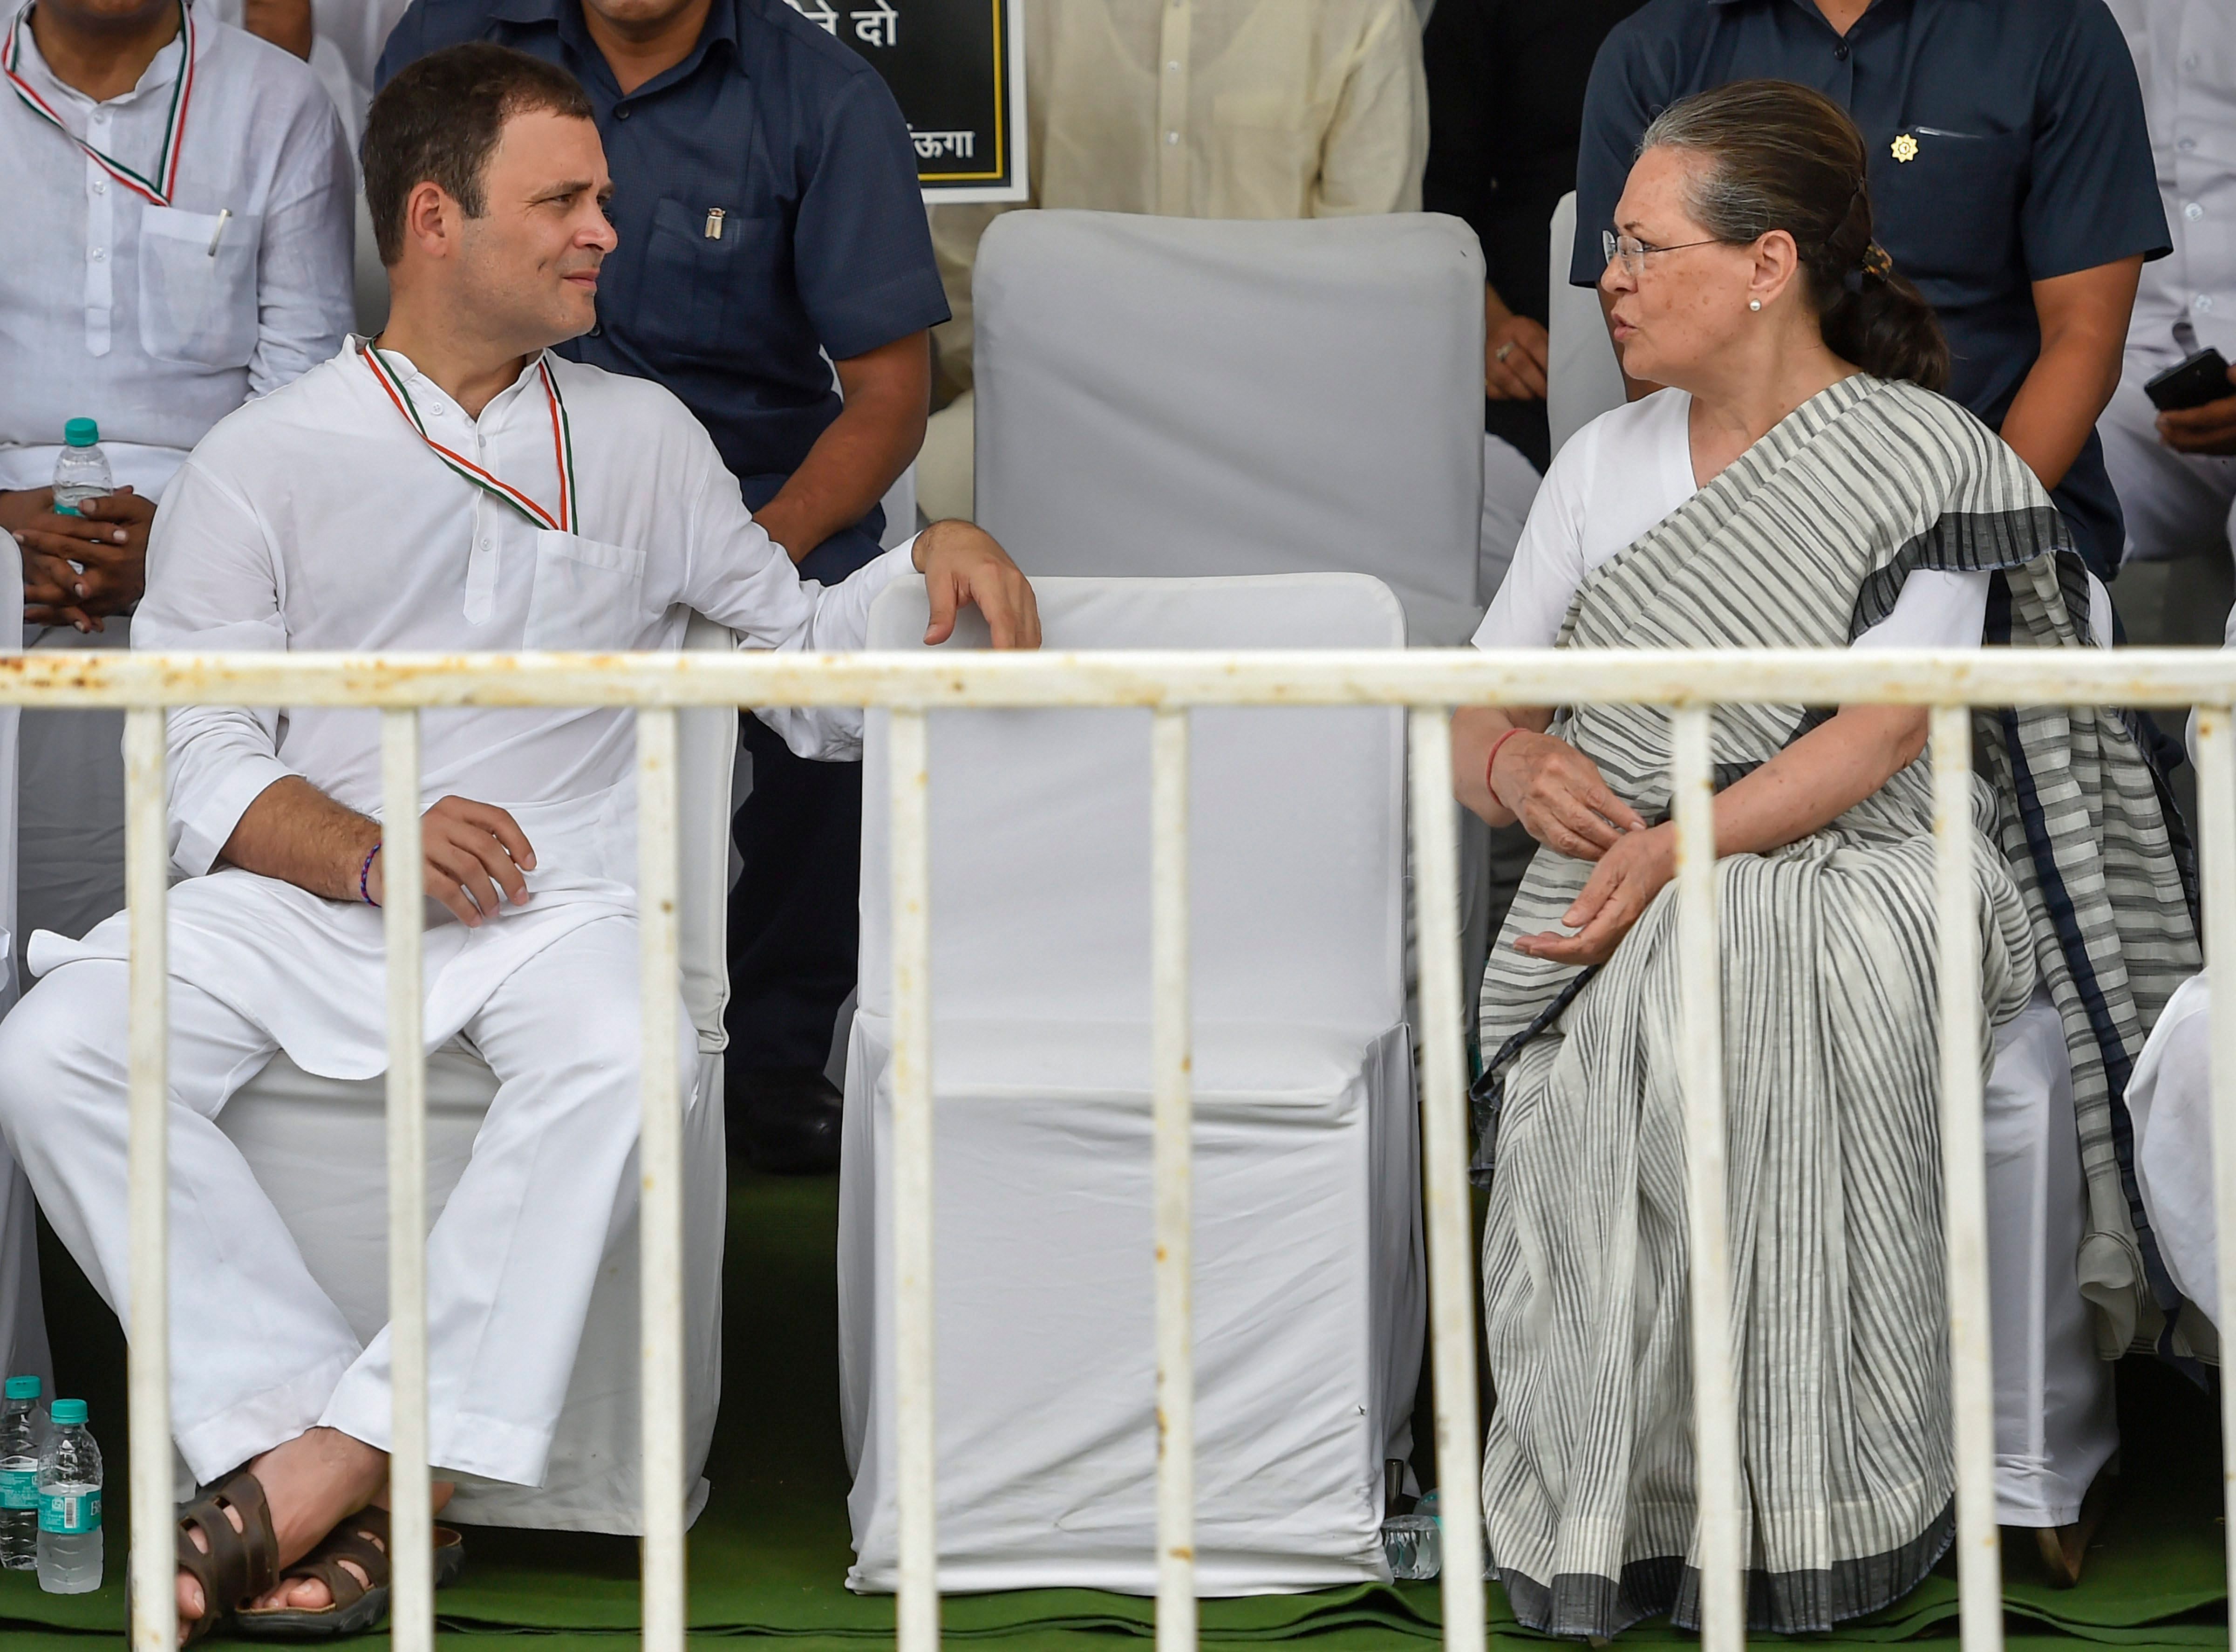 The Delhi High Court on Monday dismissed pleas by Congress leaders Sonia Gandhi and Rahul Gandhi challenging the reopening of their tax assessments for 2011-12. PTI